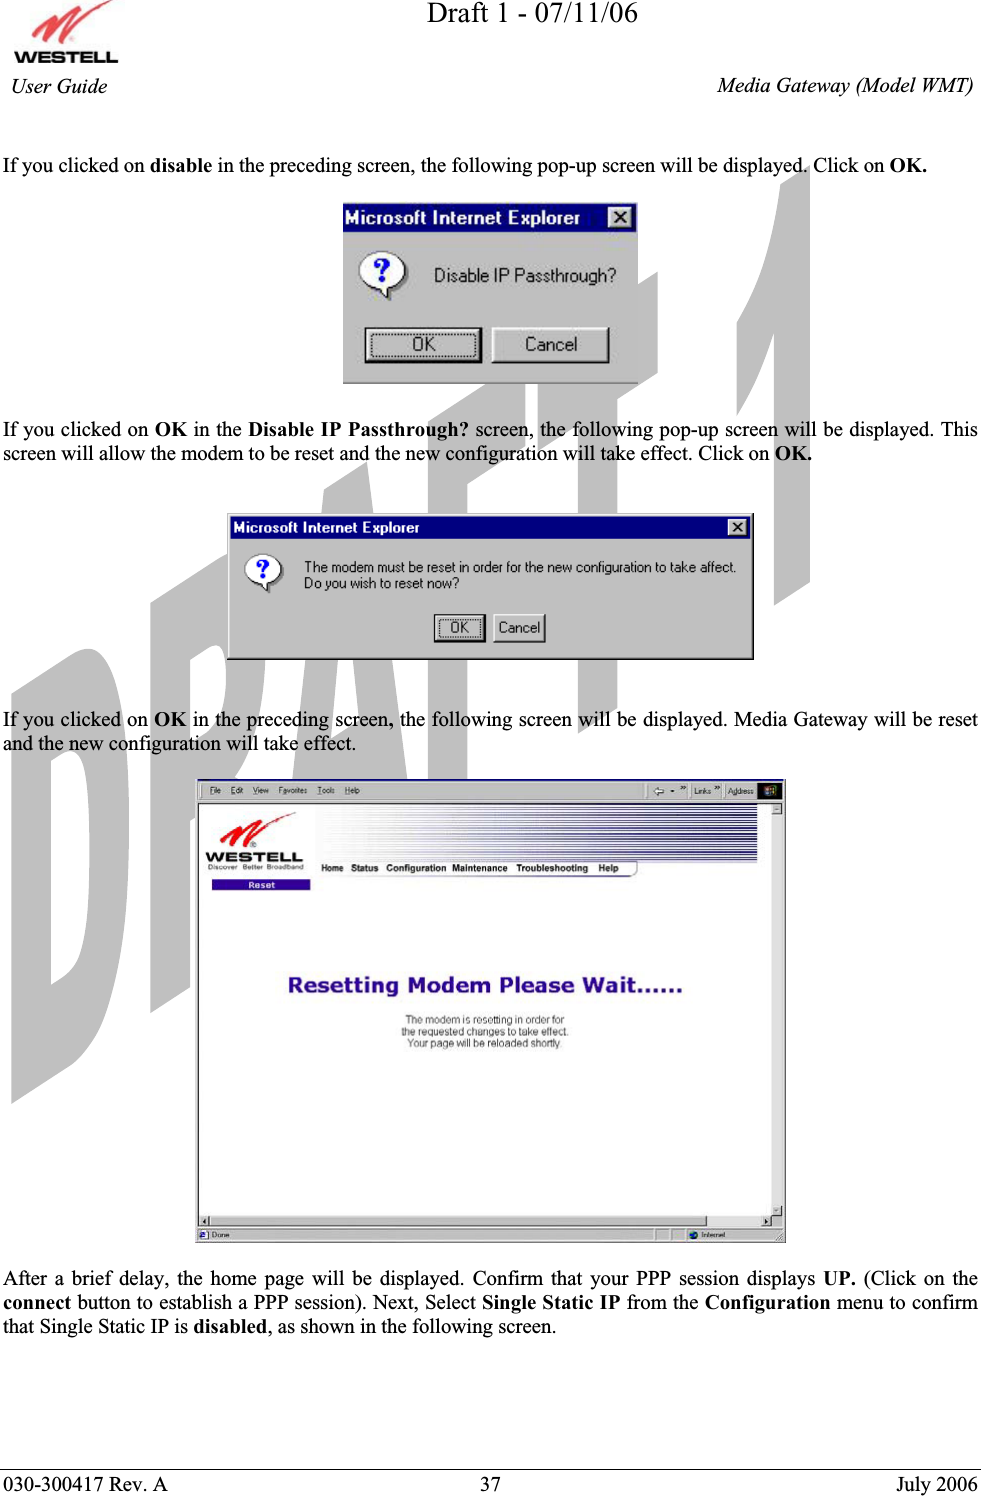 Draft 1 - 07/11/06030-300417 Rev. A  37  July 2006  Media Gateway (Model WMT) User Guide If you clicked on disable in the preceding screen, the following pop-up screen will be displayed. Click on OK. If you clicked on OK in the Disable IP Passthrough? screen, the following pop-up screen will be displayed. This screen will allow the modem to be reset and the new configuration will take effect. Click on OK.If you clicked on OK in the preceding screen, the following screen will be displayed. Media Gateway will be reset and the new configuration will take effect.  After a brief delay, the home page will be displayed. Confirm that your PPP session displays UP.  (Click on the connect button to establish a PPP session). Next, Select Single Static IP from the Configuration menu to confirm that Single Static IP is disabled, as shown in the following screen. 